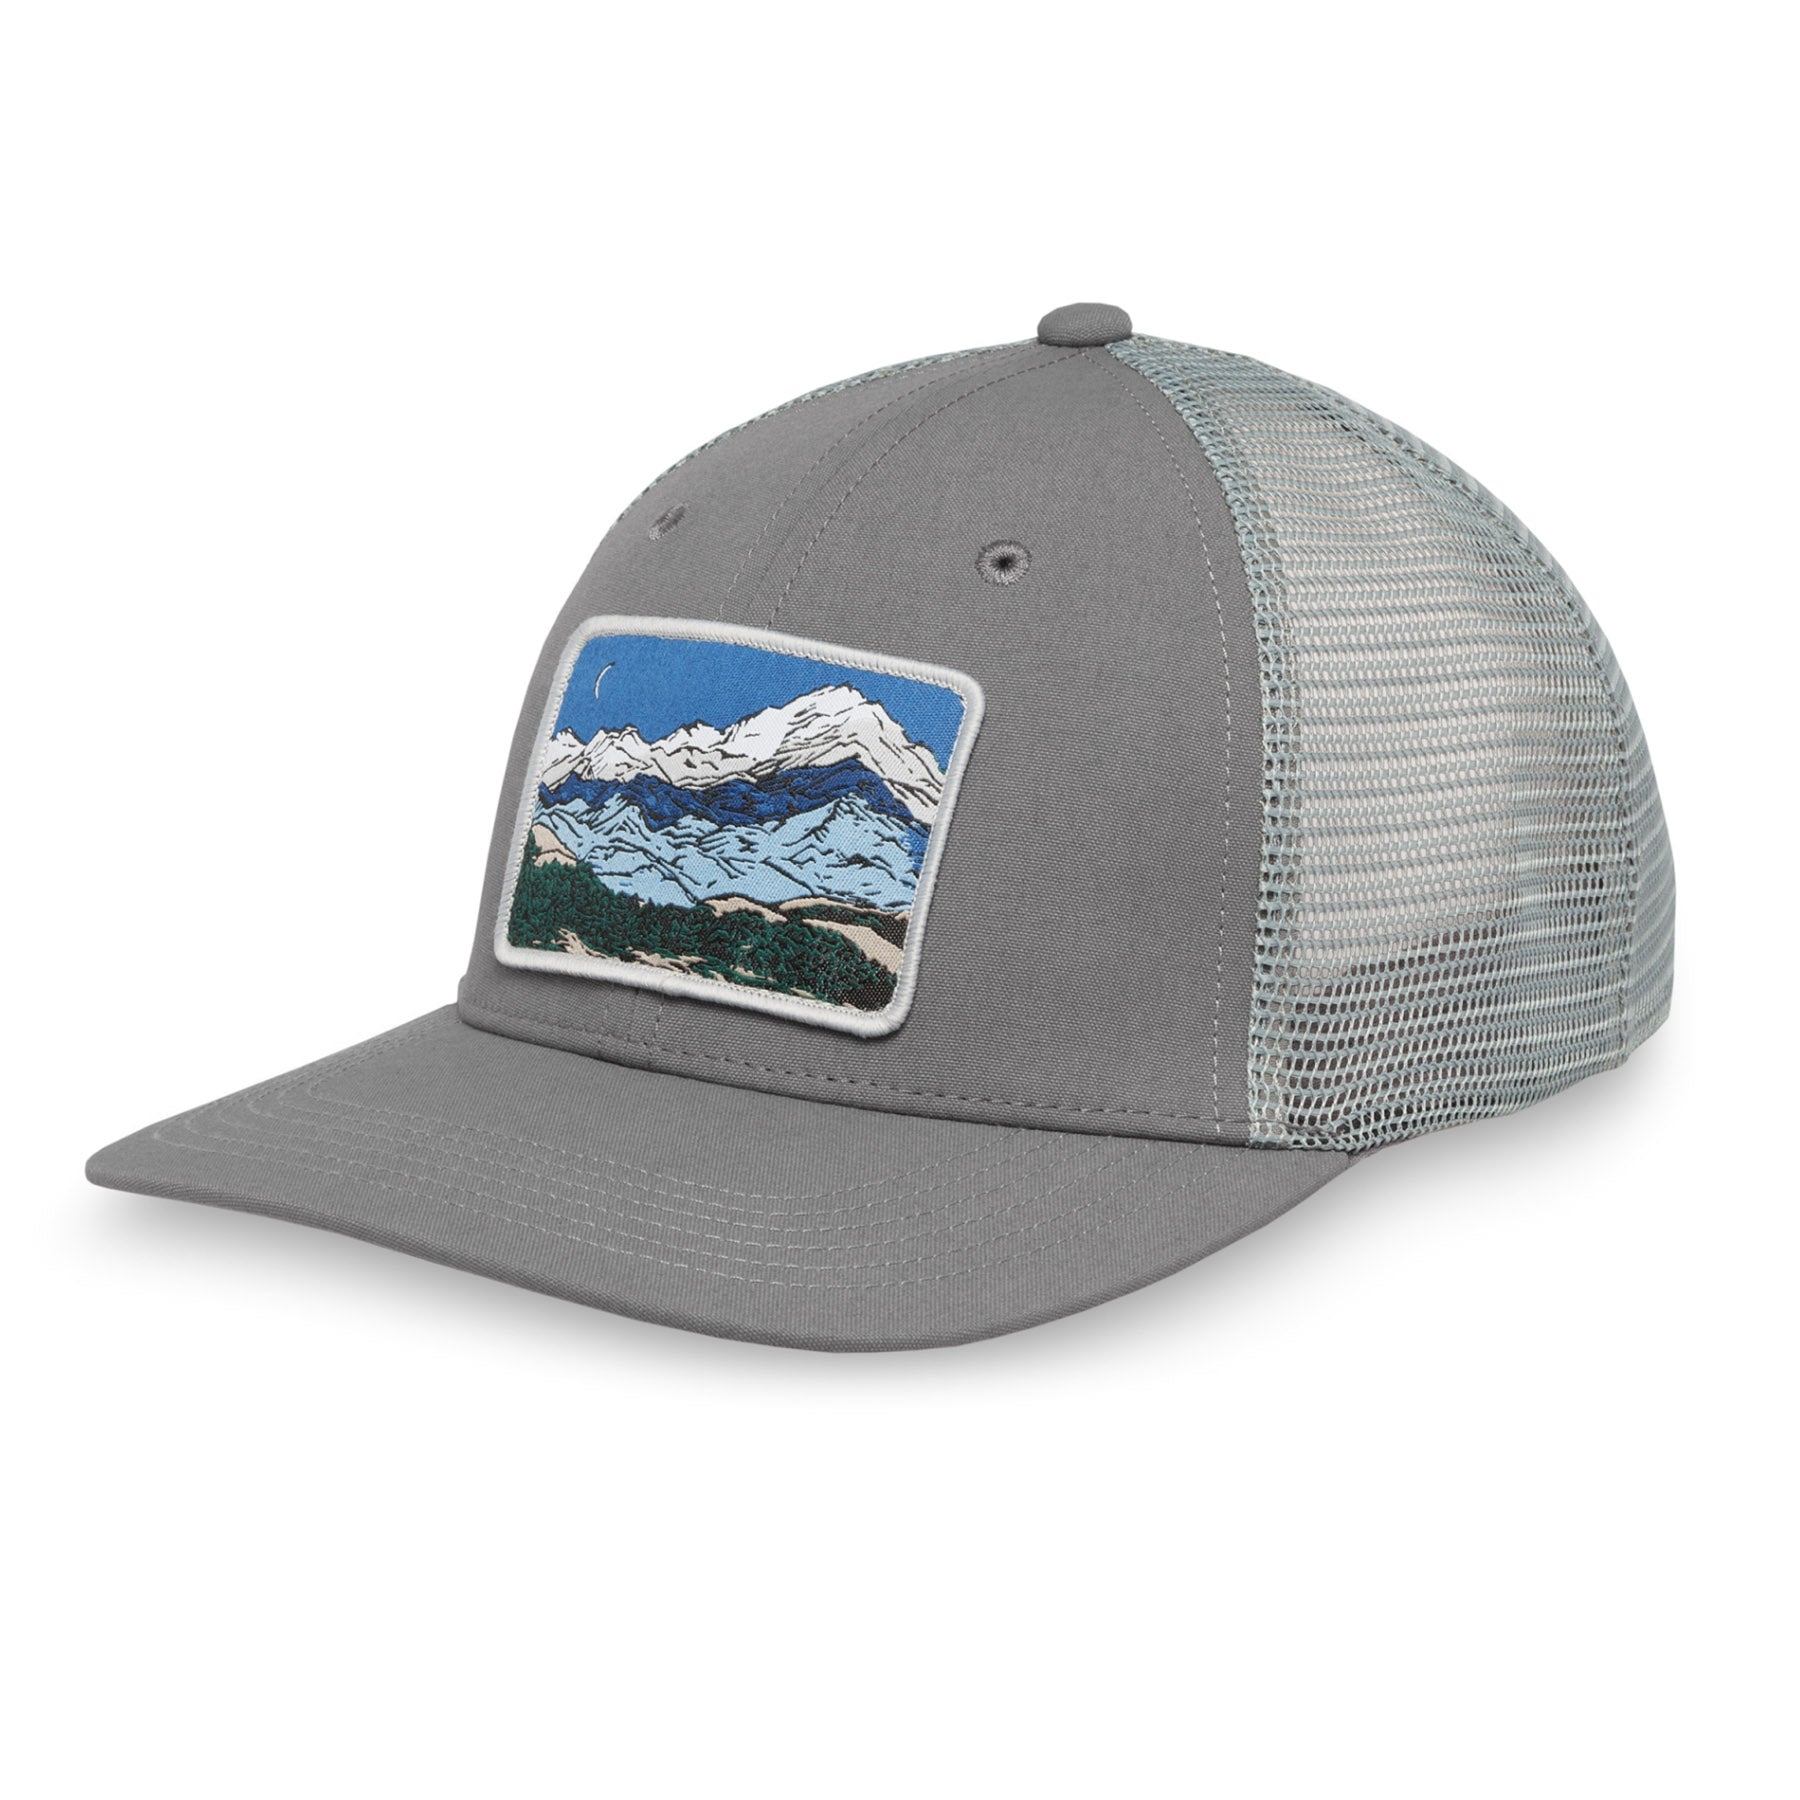 Sunday Afternoons Hats Artist Patch Trucker